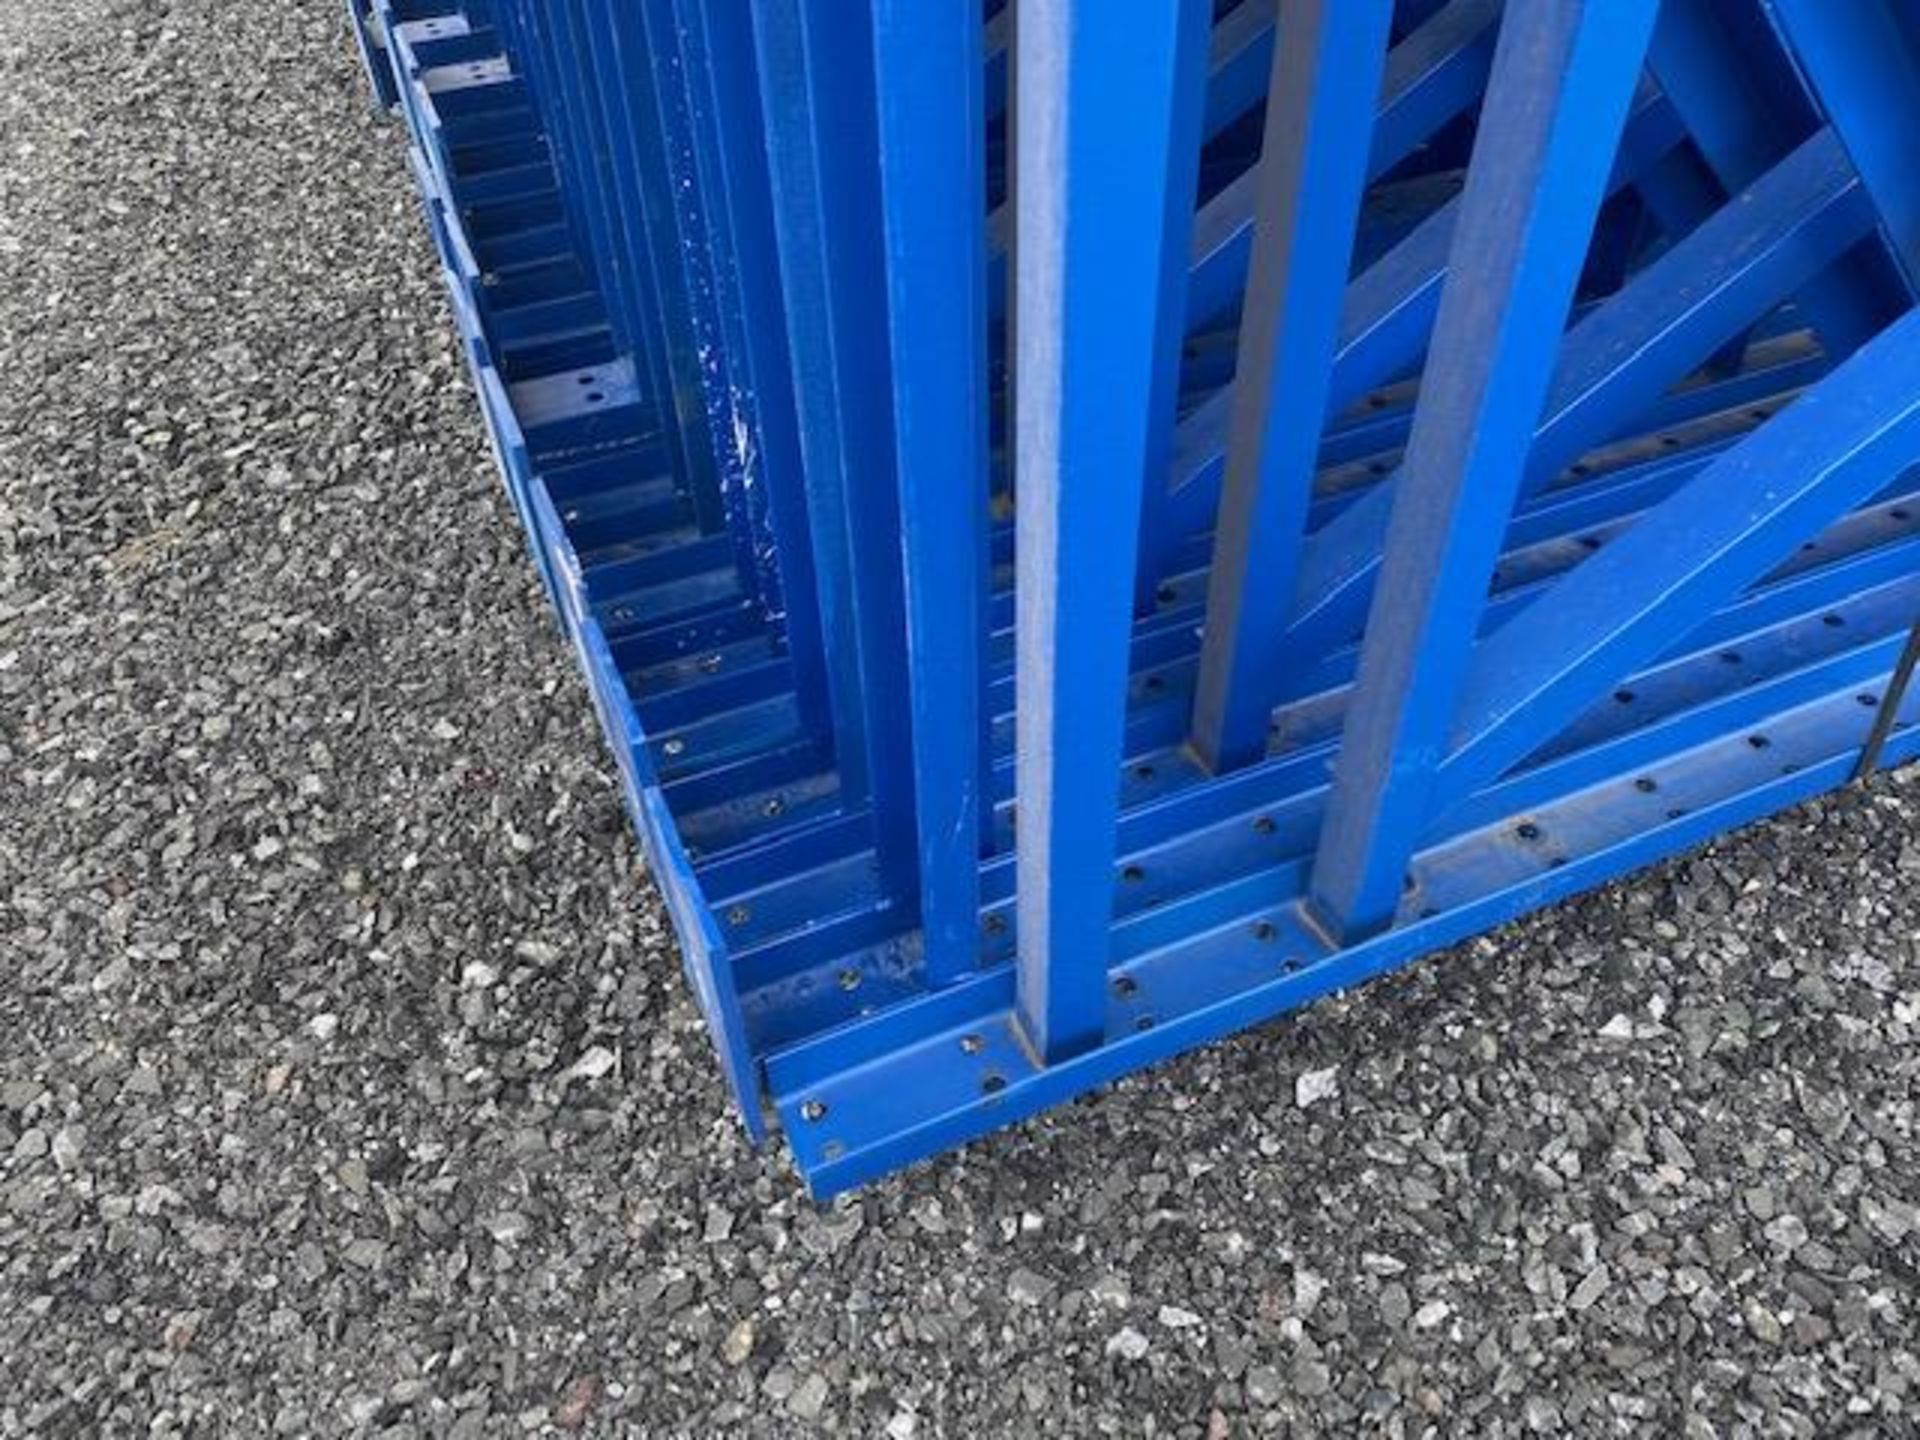 Structural upright racking 44 ''x 18' - Image 2 of 2